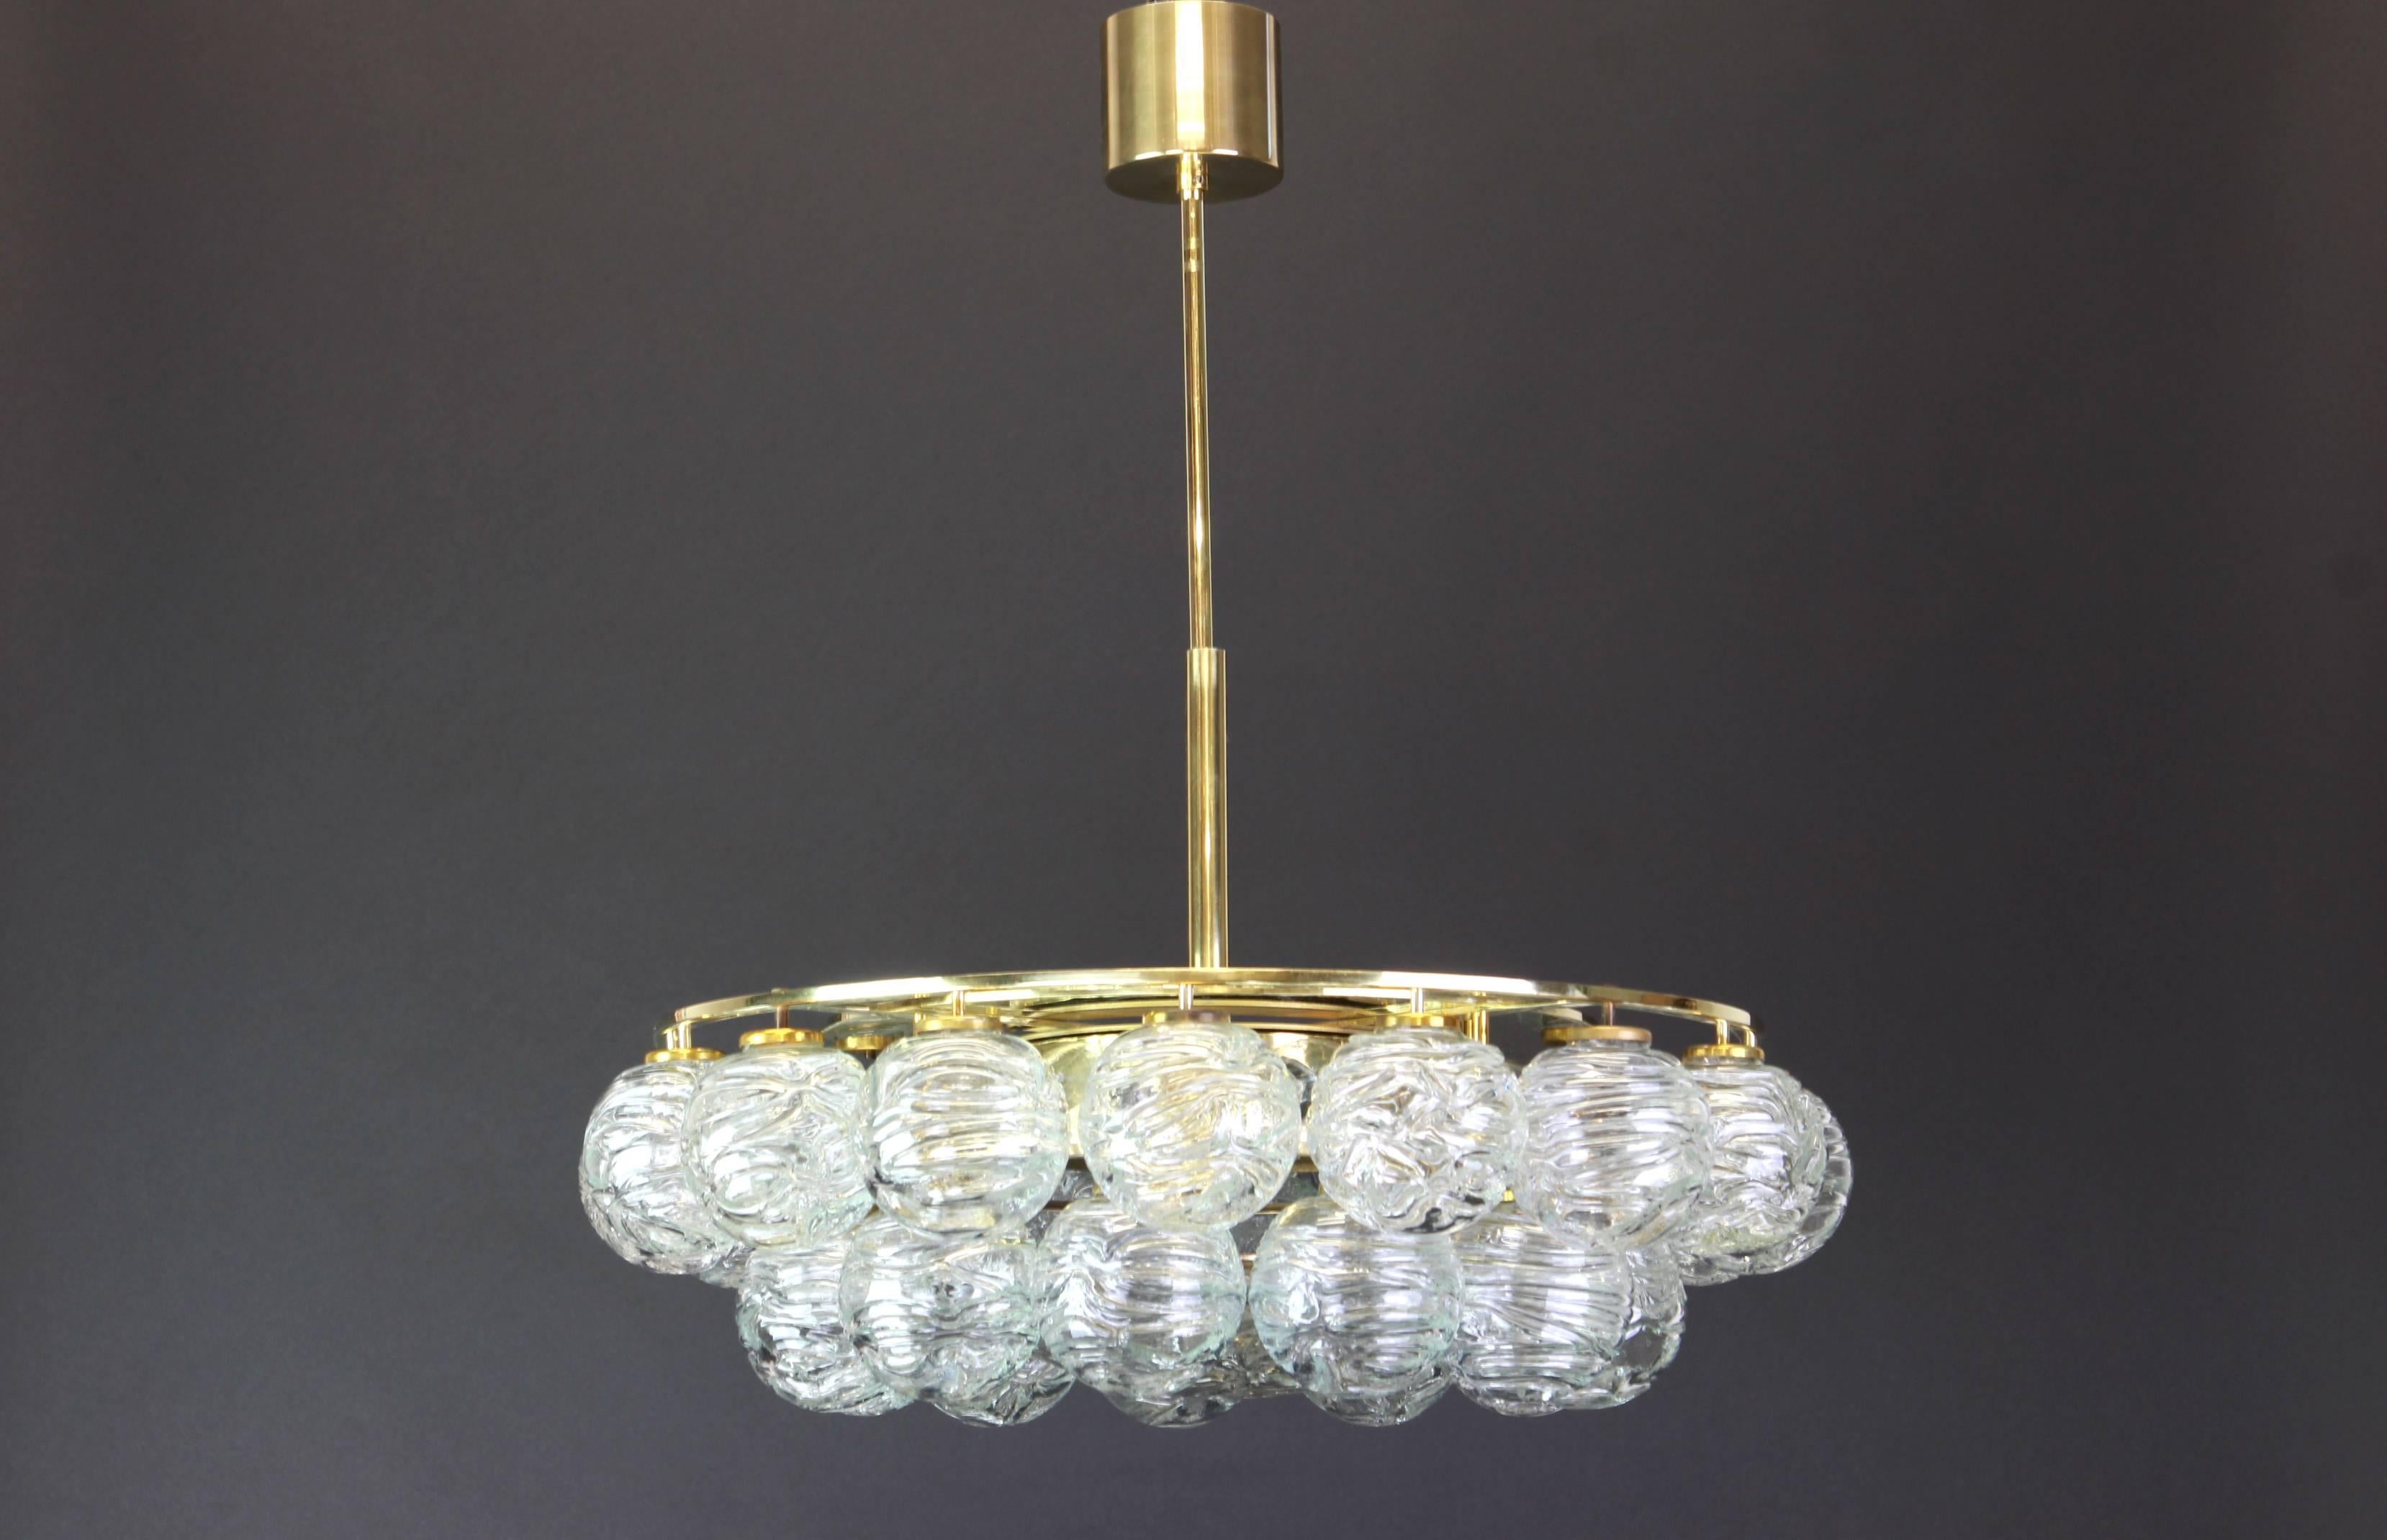 A stunning Mid-Century chandelier made by Doria Leuchtern, manufactured in Germany, circa 1970-1979.
The chandelier is composed of 31 glass swirl textured ice glass elements (snowballs) attached to a brass frame.
All glass balls are in very good